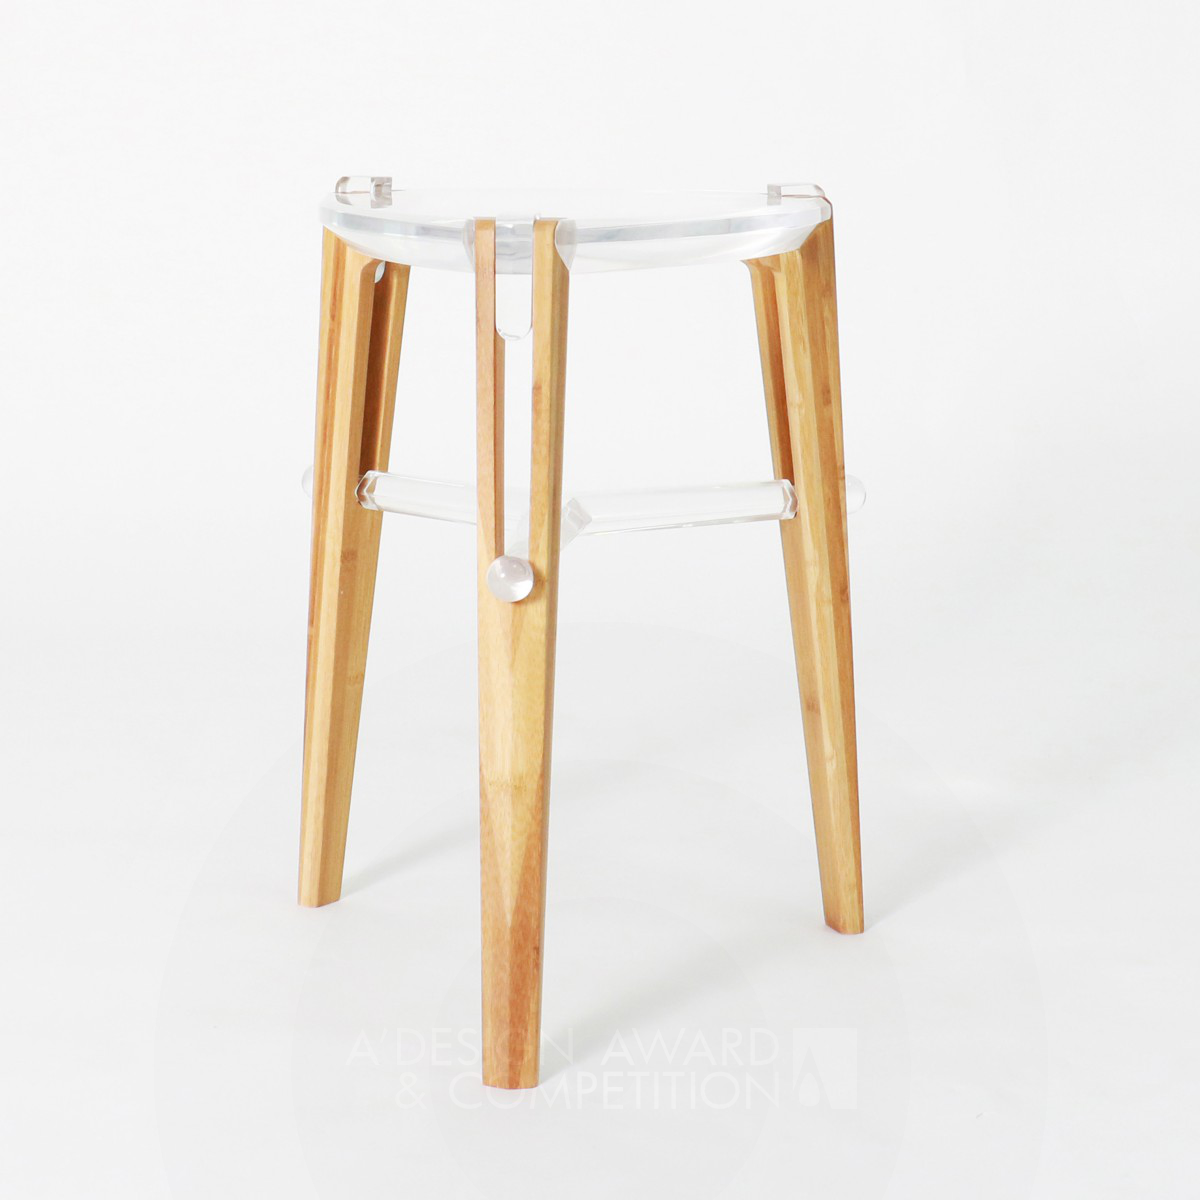 Xu Le wins Silver at the prestigious A' Furniture Design Award with V Stool Self Assembled Seat.